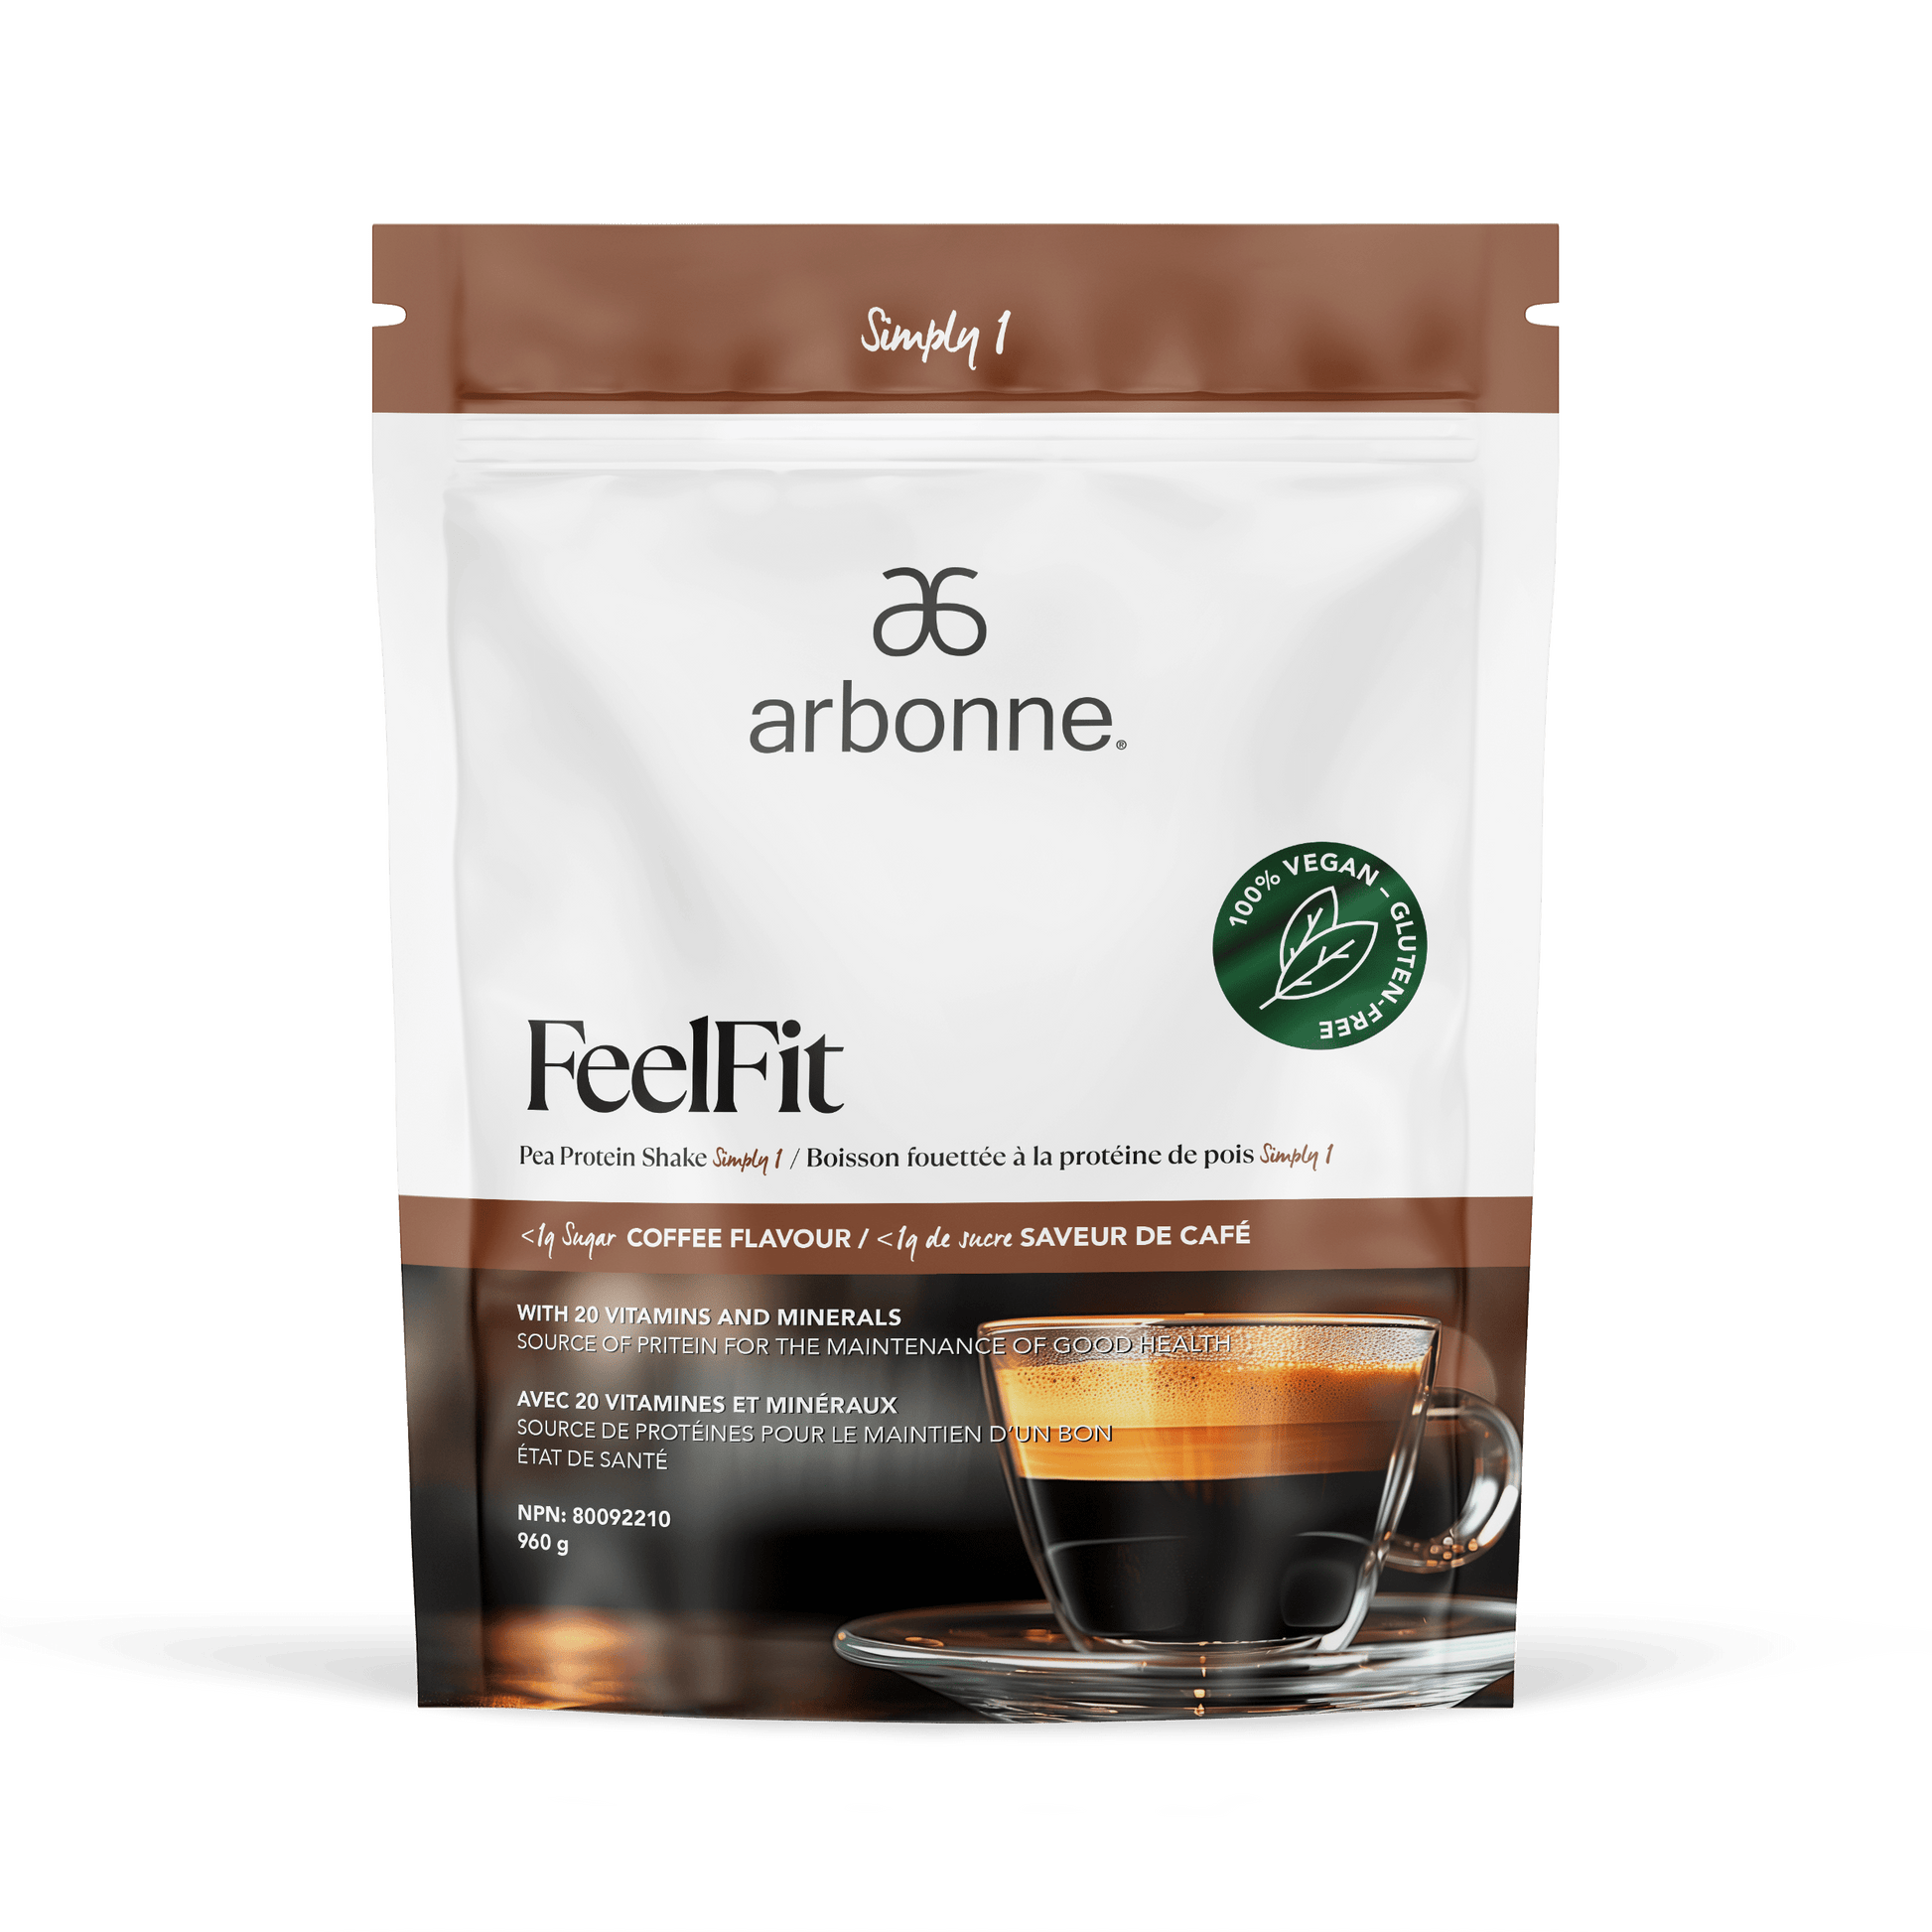 Arbonne FeelFit vegan pea protein powder in coffee flavor, displayed in a sleek white and brown packaging with a green vegan certification seal, against a white background.